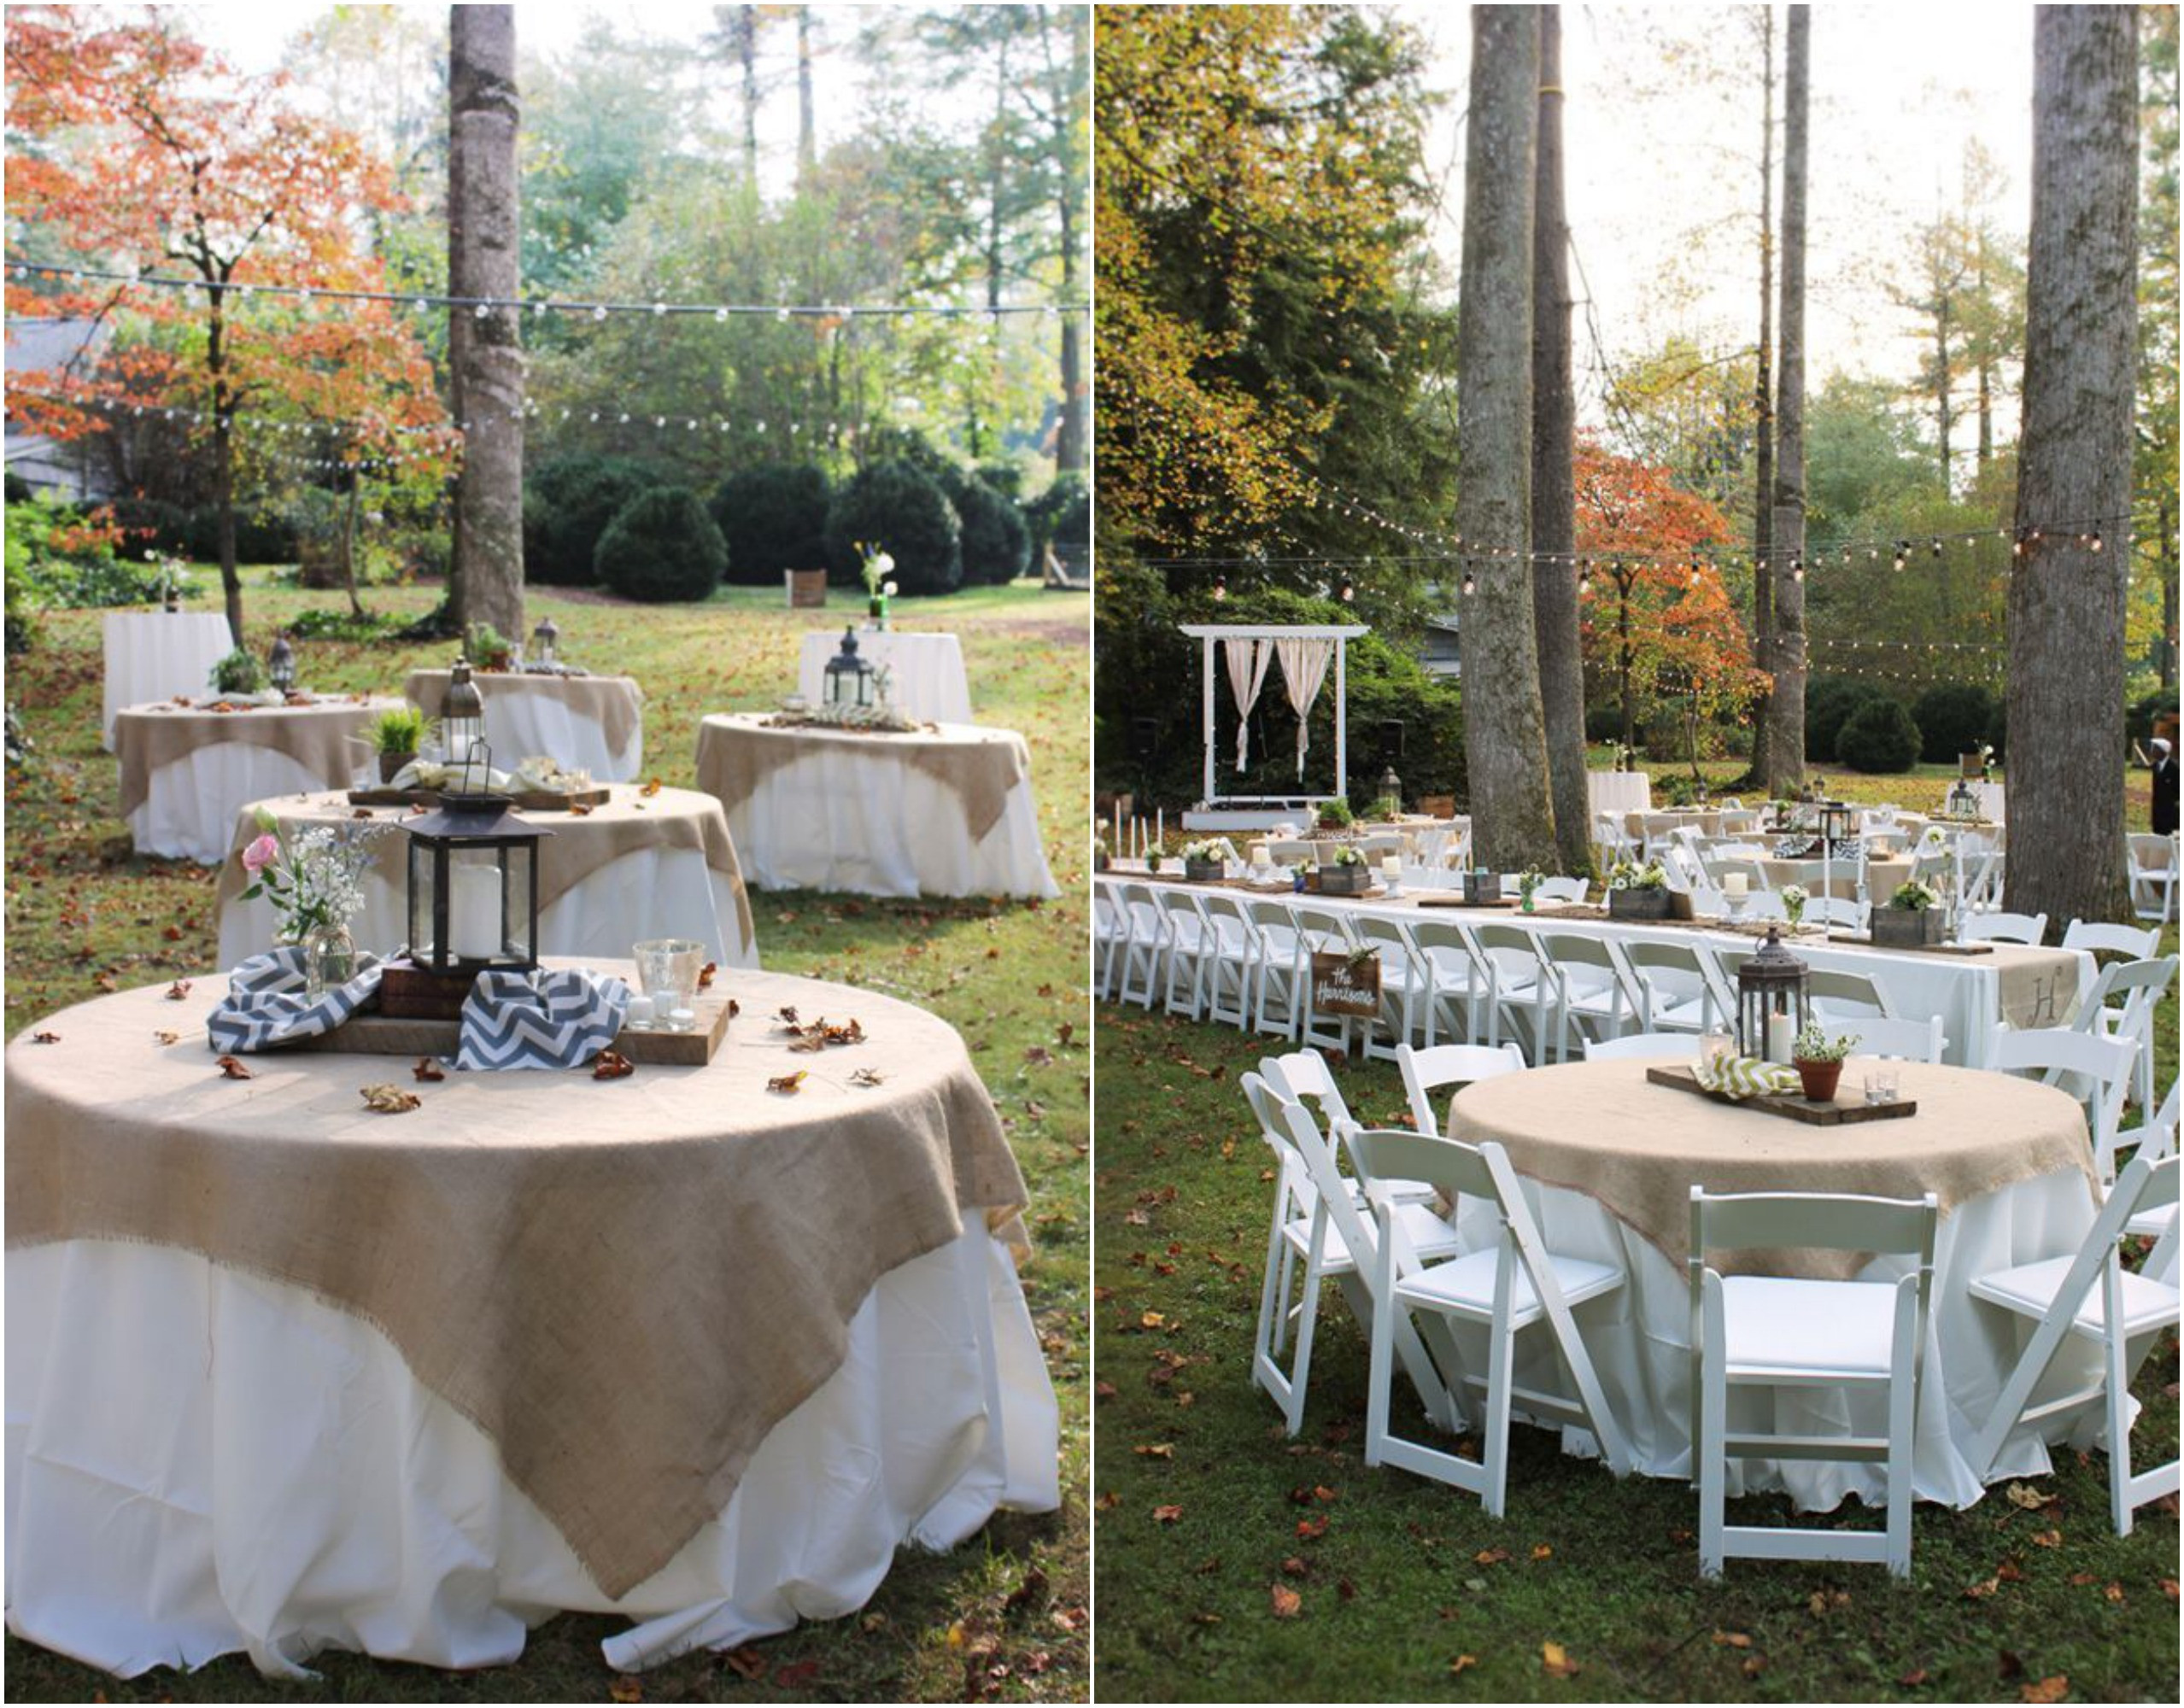 Backyard Country Wedding
 Noteable Expressions 10 HOT WEDDING TRENDS FOR 2014